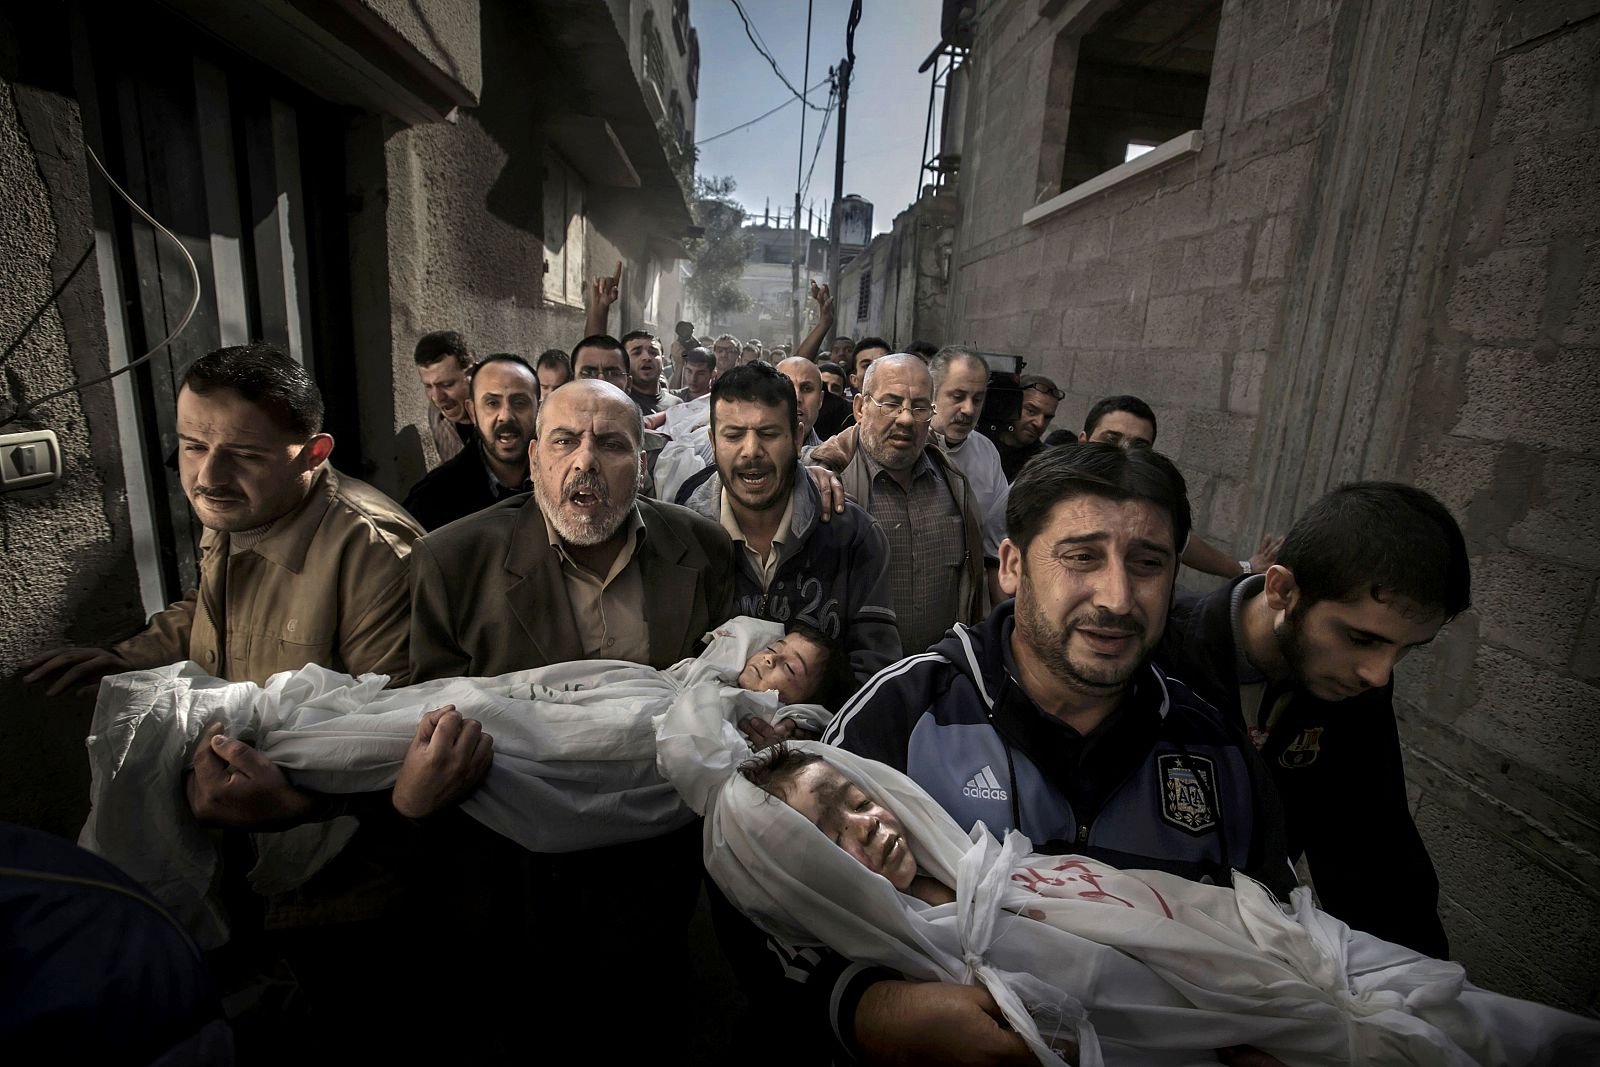 Paul Hansen of Sweden has won the World Press Photo of the Year 2012 with this picture of a group of men carrying the bodies of two dead children through a street in Gaza City